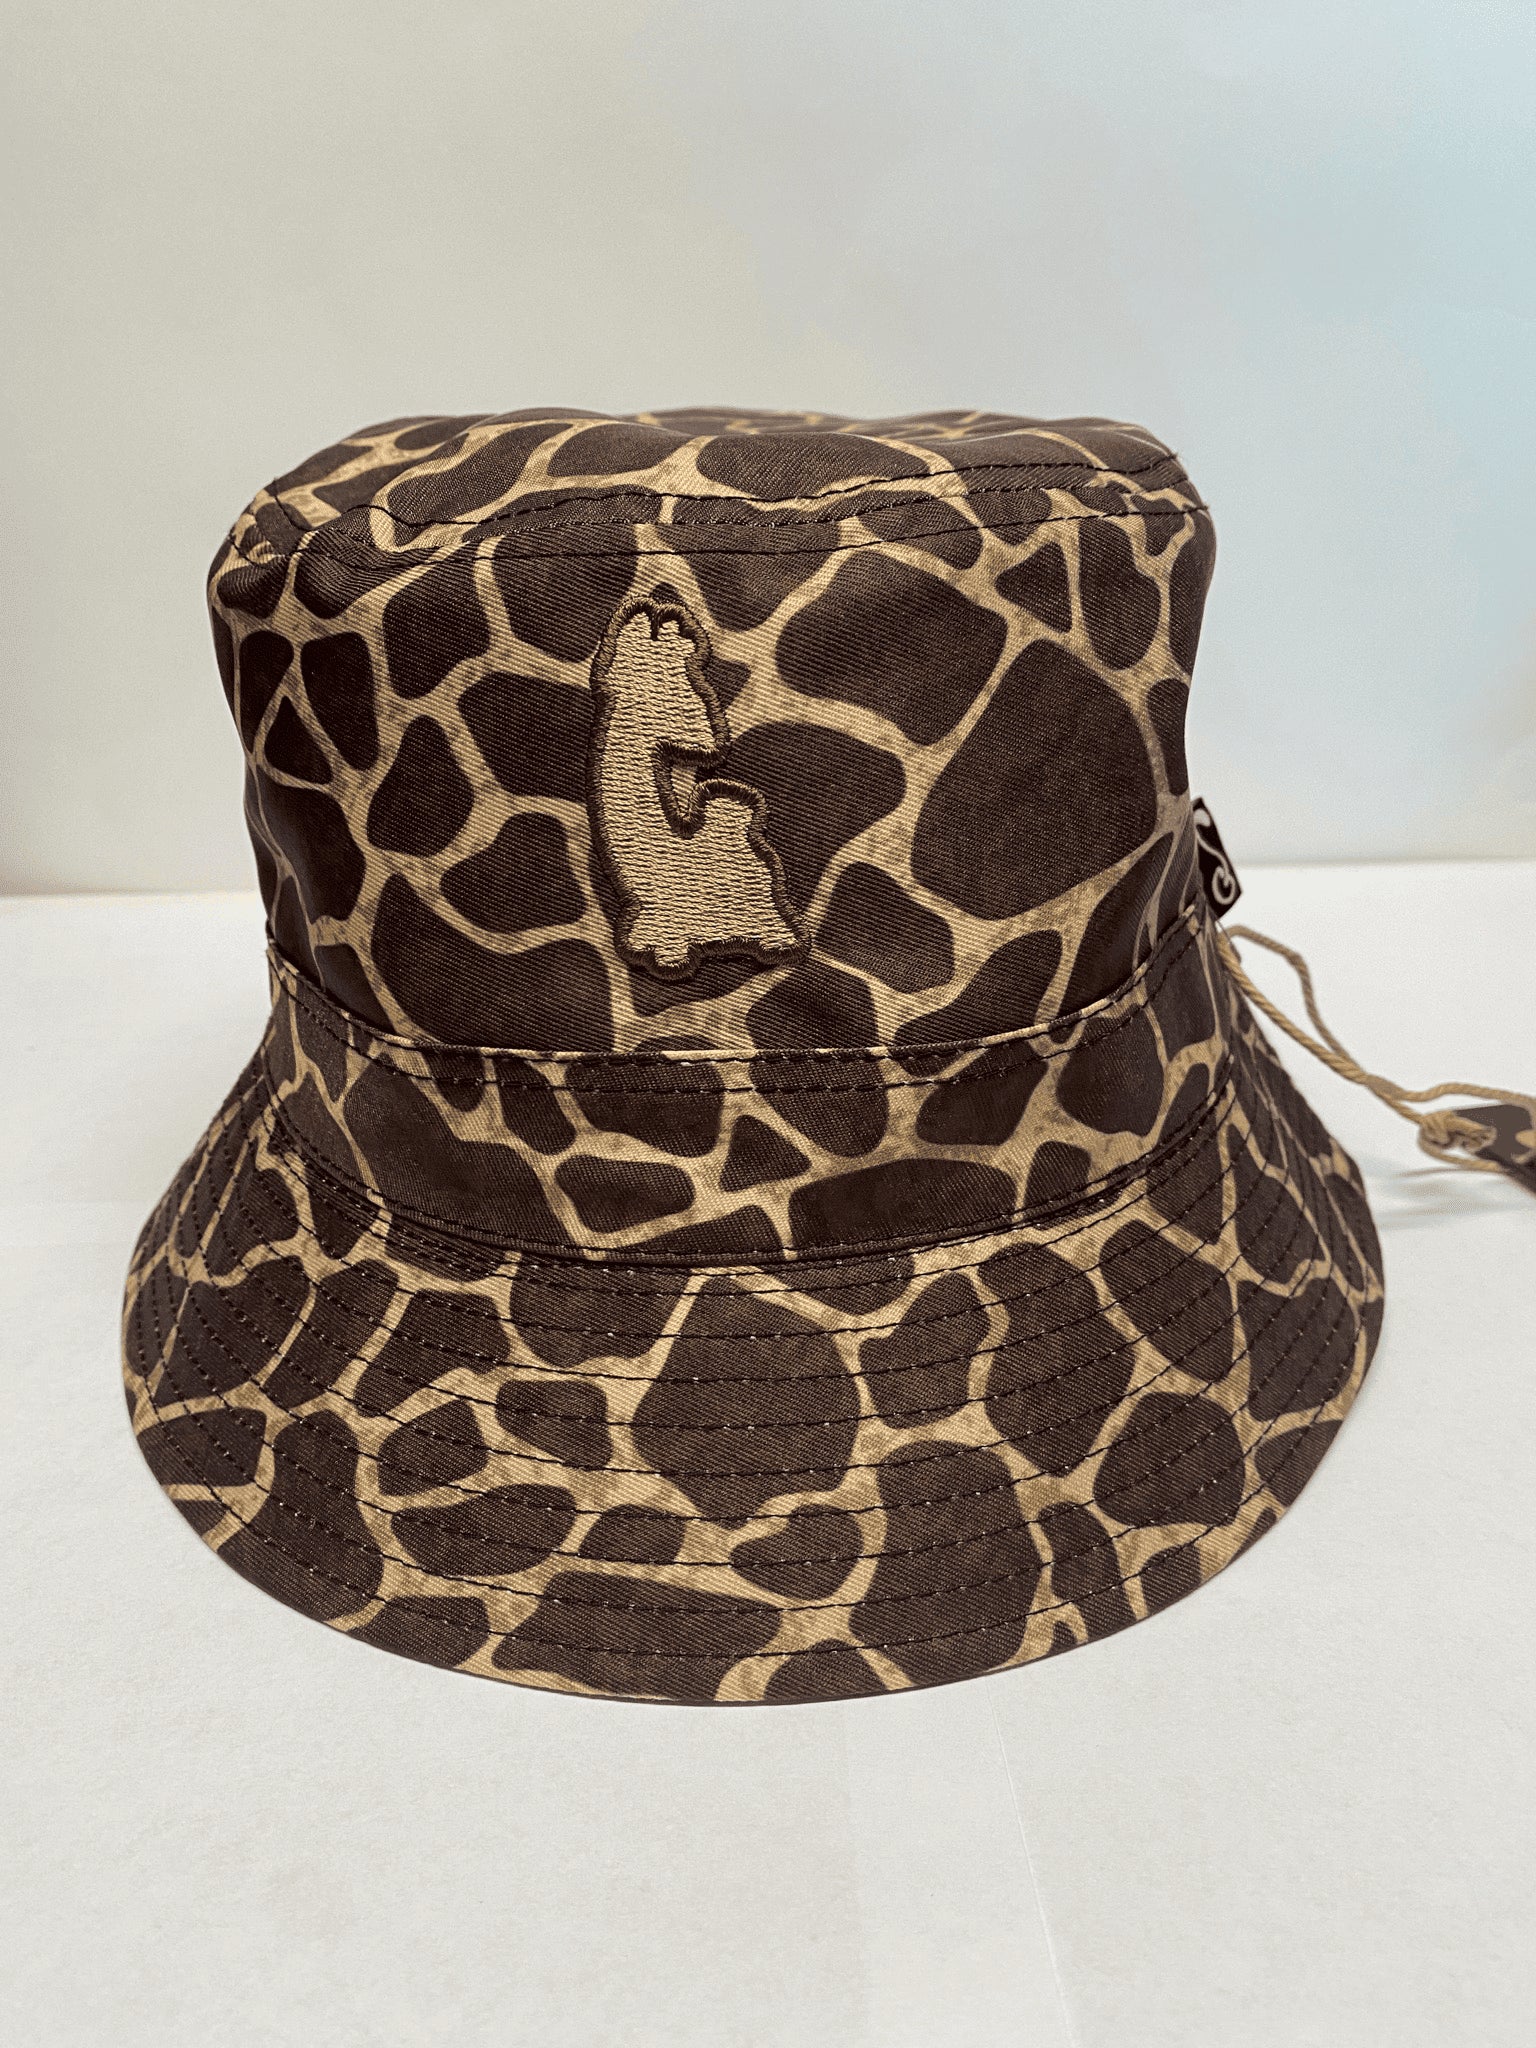 premium quality design of the Bucket Hat (S/M) by Robertson Glass